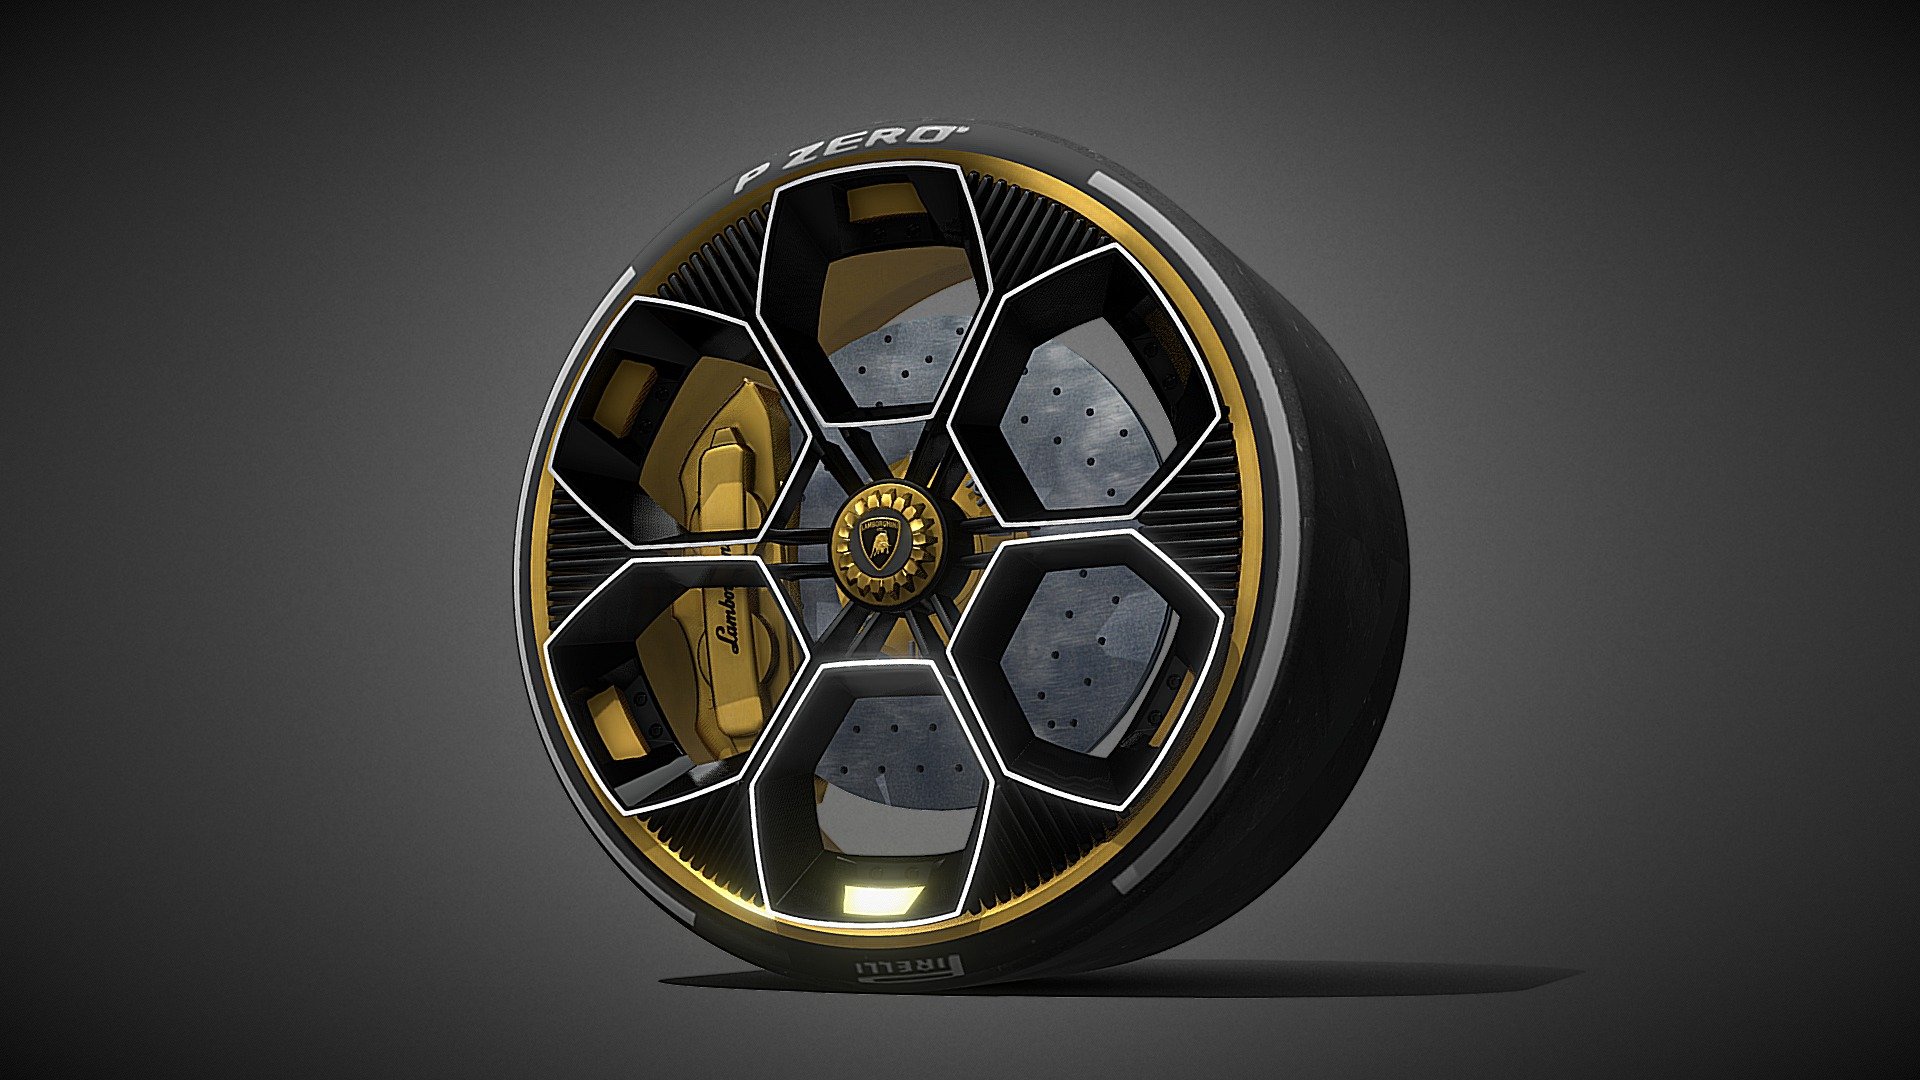 Wheel of the Lamborghini Vision GT  of Gran Turismo.

Tire + Rim + Brak + Disk + Logo Lamborghini = Wheel

By SDC PERFORMANCE - Blender 3.0 - Low poly - Free download

For more models click here (everything is free !!) :

https://sketchfab.com/3Duae - Wheel - Lamborghini Vision GT - Gran Turismo - Download Free 3D model by SDC PERFORMANCE™️ (@3Duae) 3d model